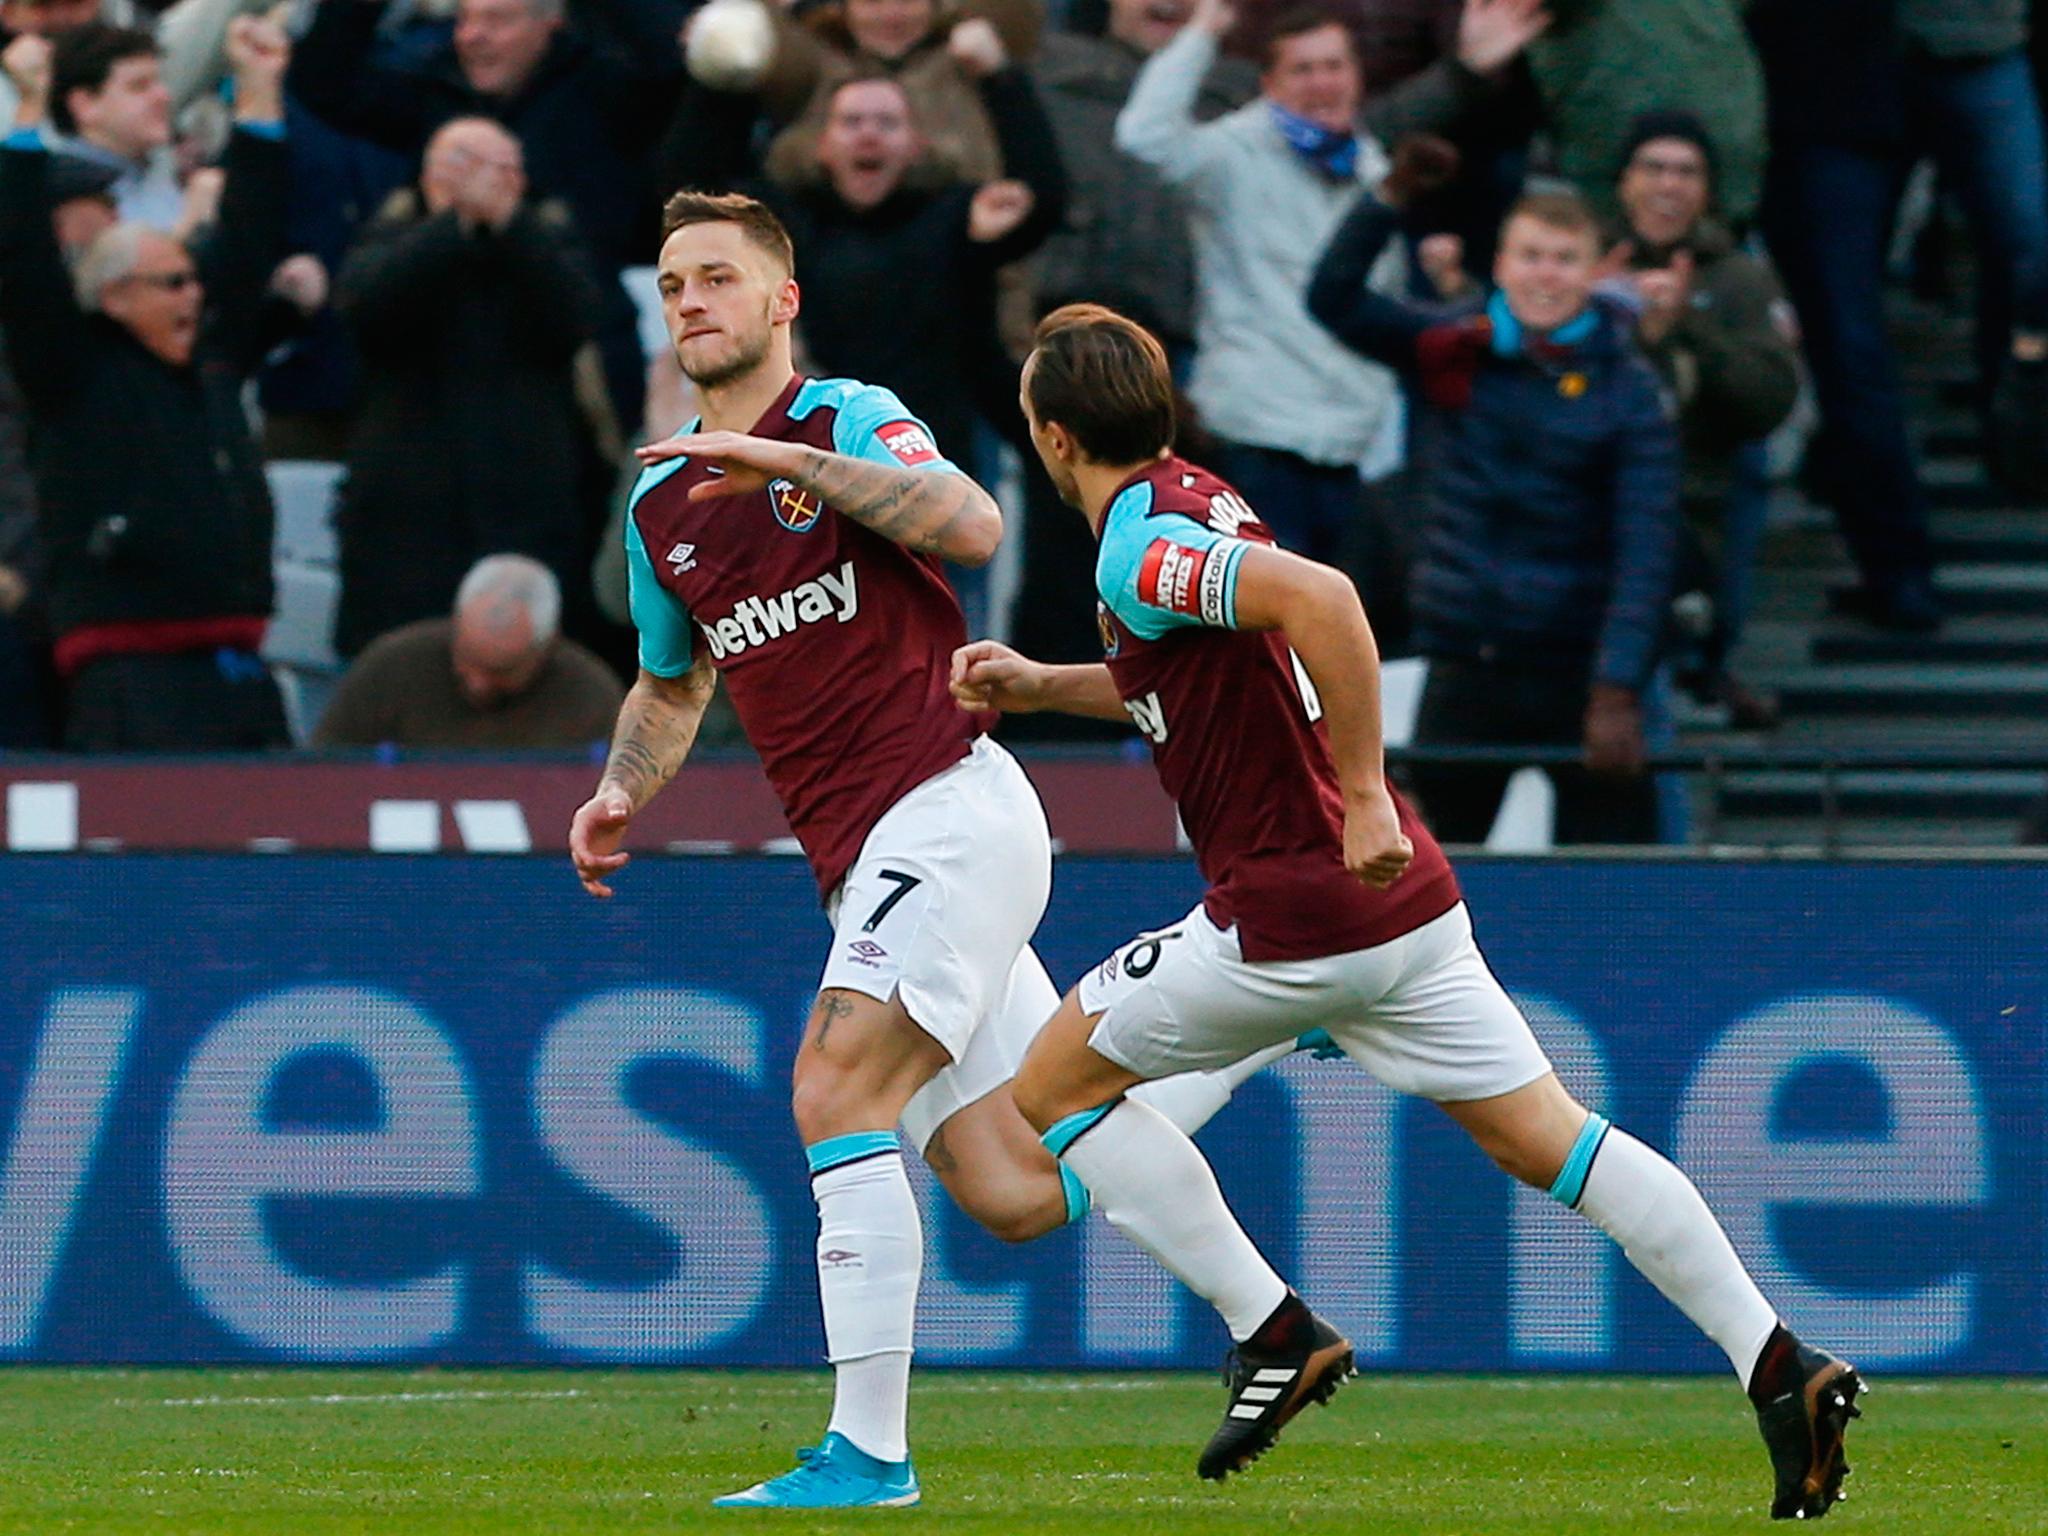 West Ham vs Chelsea live: Latest score, what time does it start, where can I watch it, what TV channel